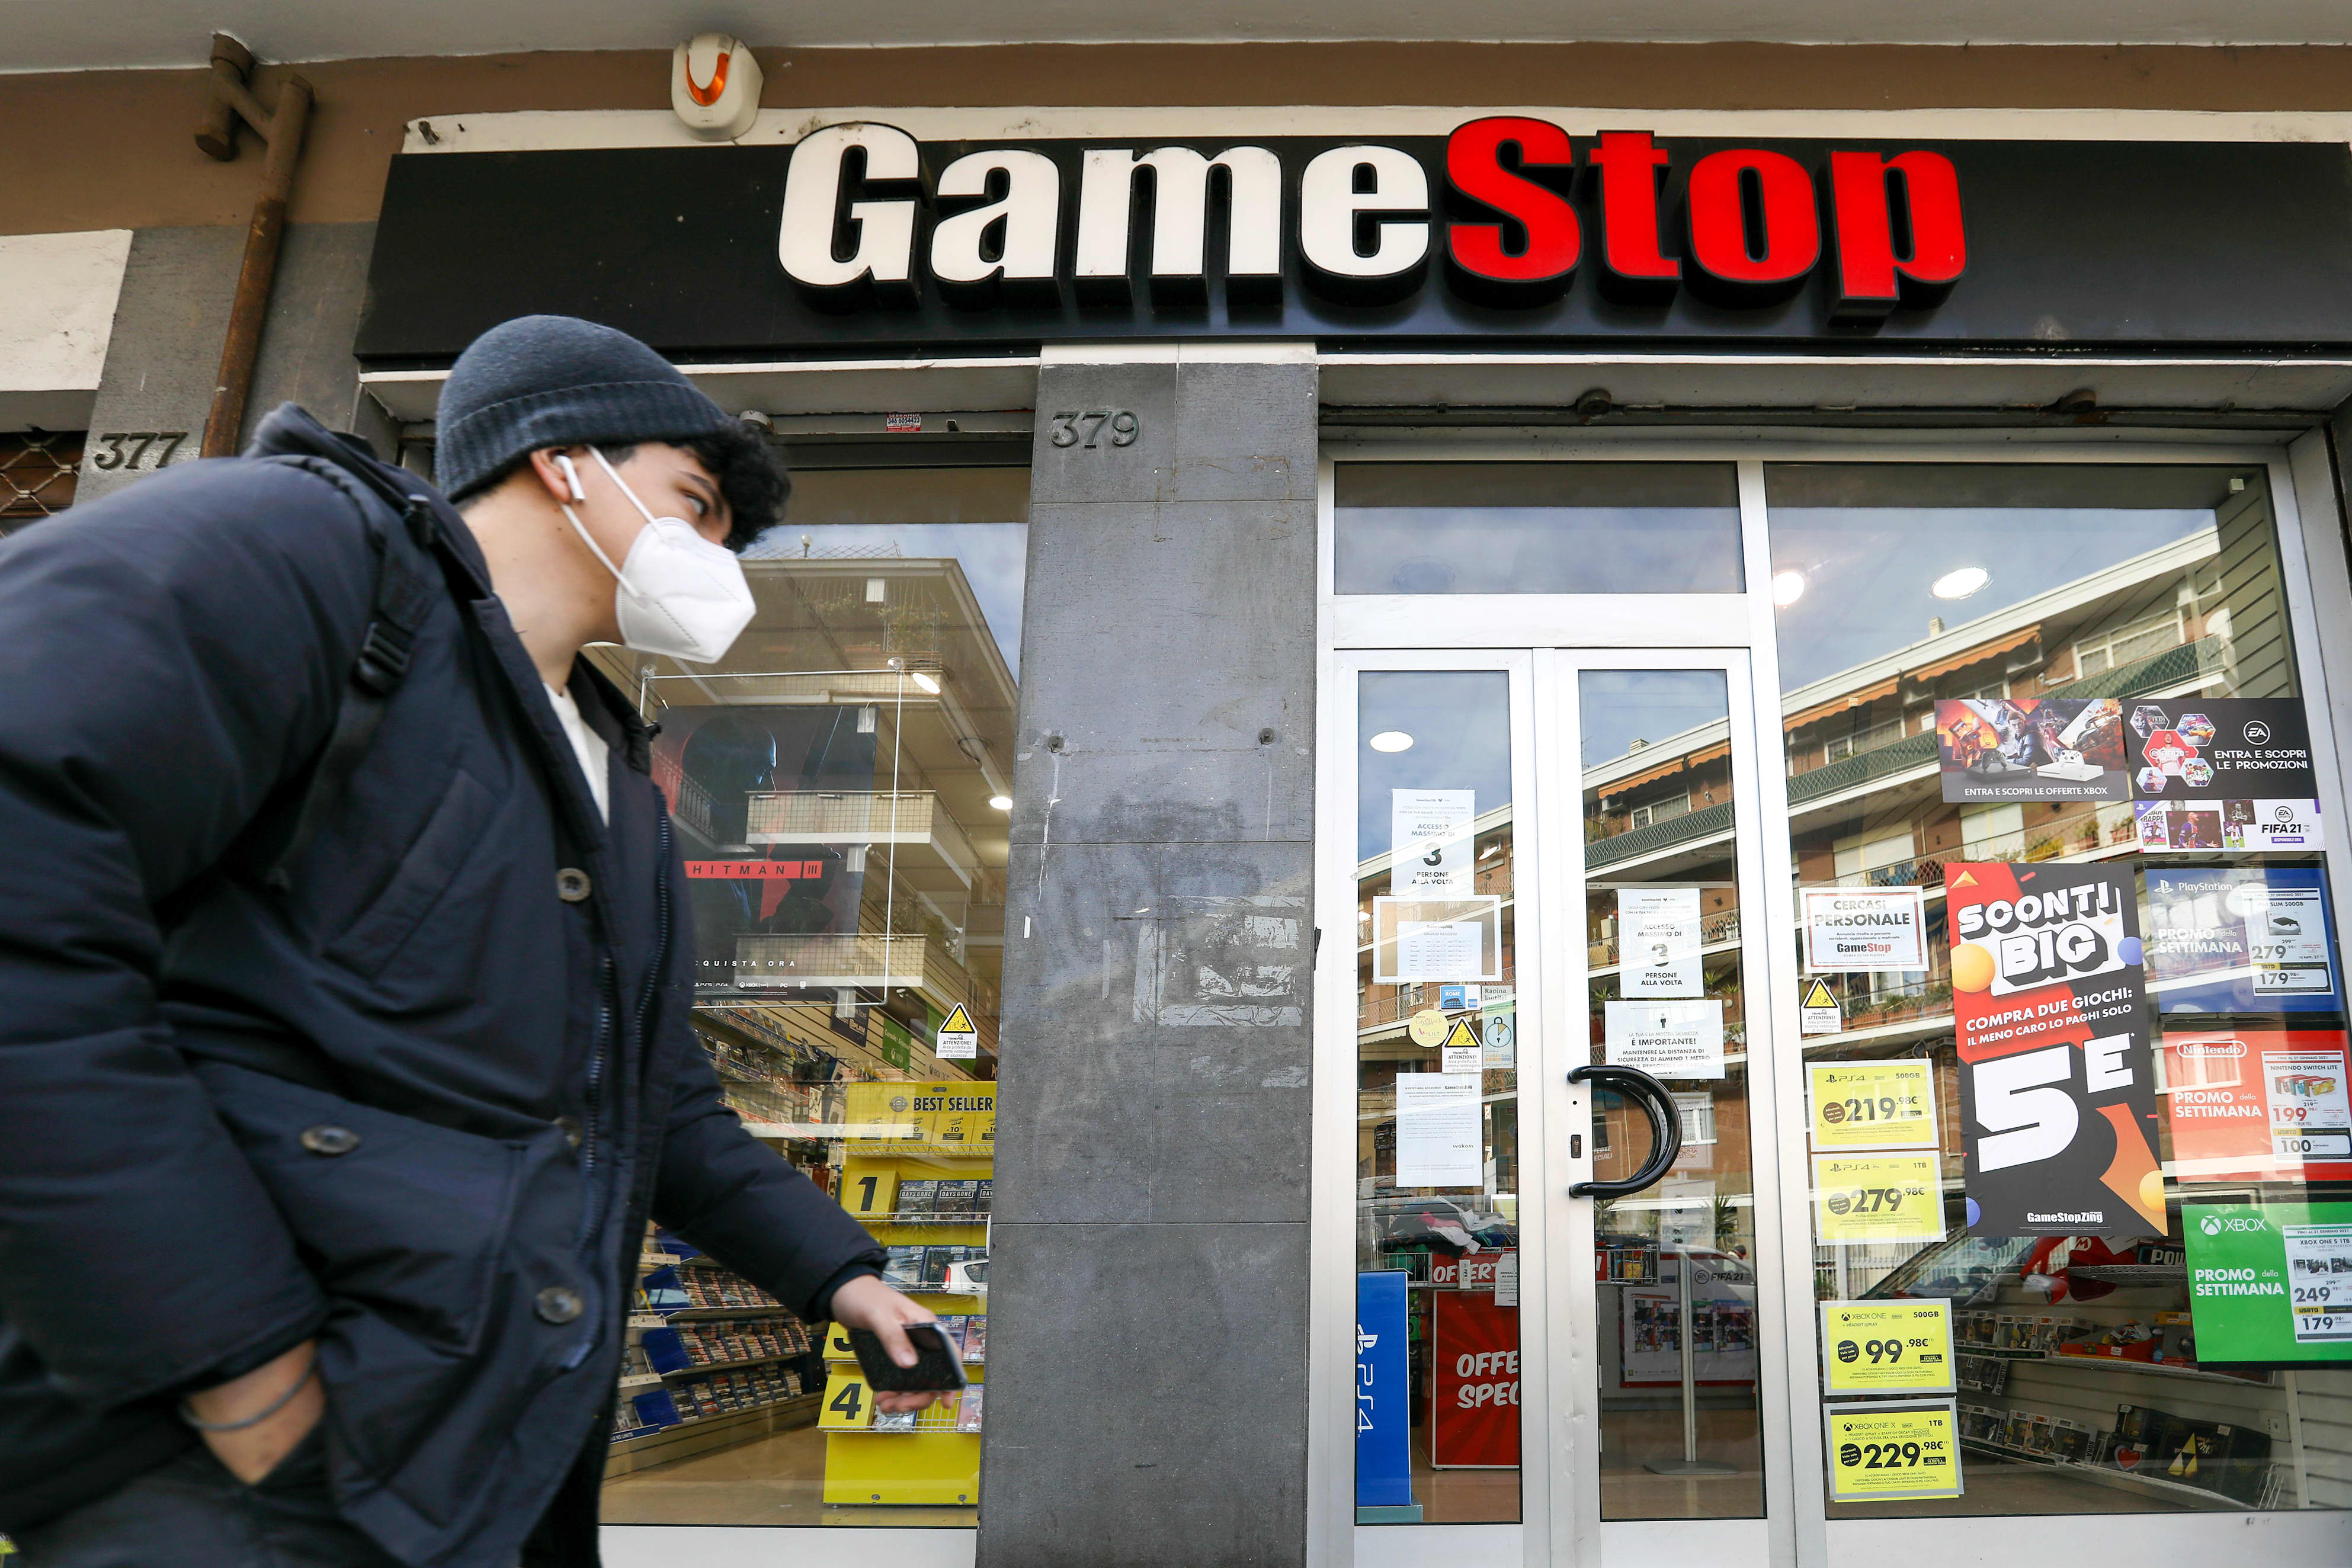 AMC, Gamestop stock offers are positive in the long run